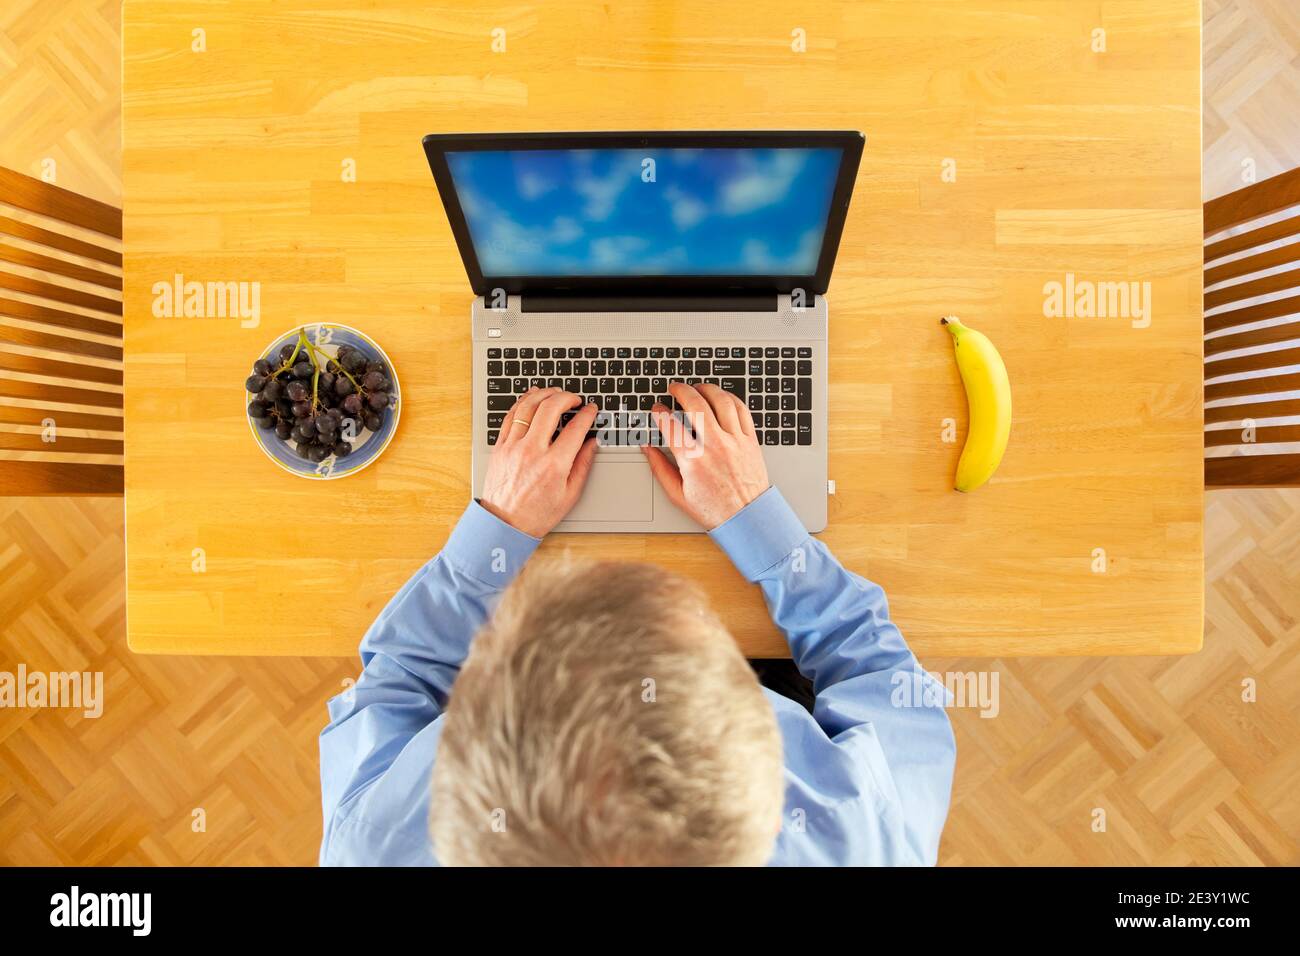 Businessman working in home office with laptop and fruits on a wooden table - overhead view Stock Photo